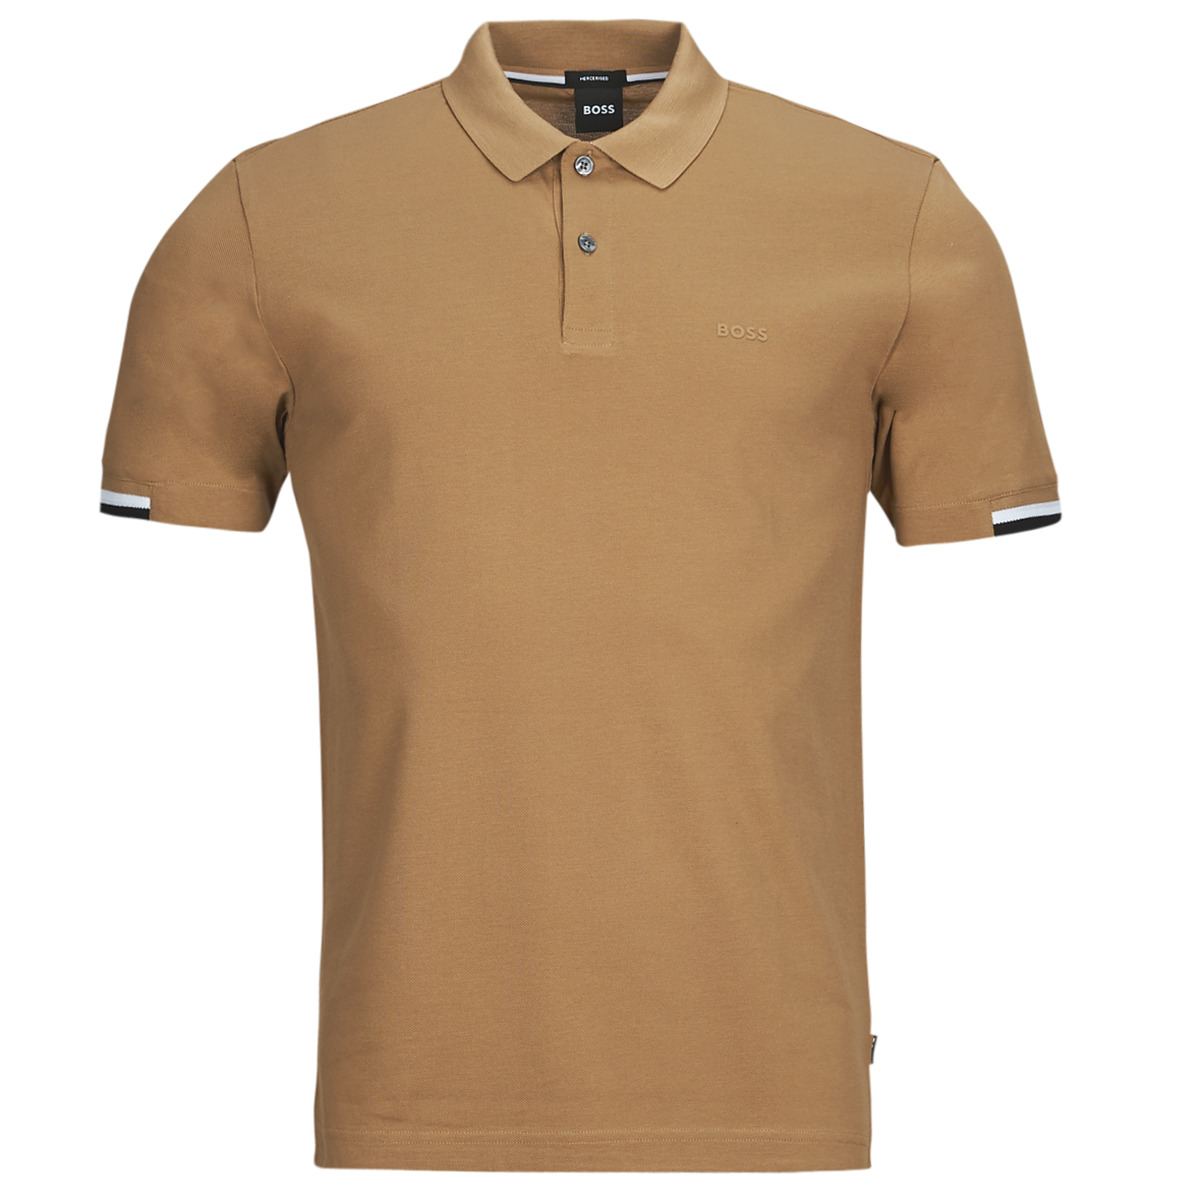 Vêtements Homme SS MILLERS RIVER TIPPED PIQUE SLIM PARLAY 147 Camel